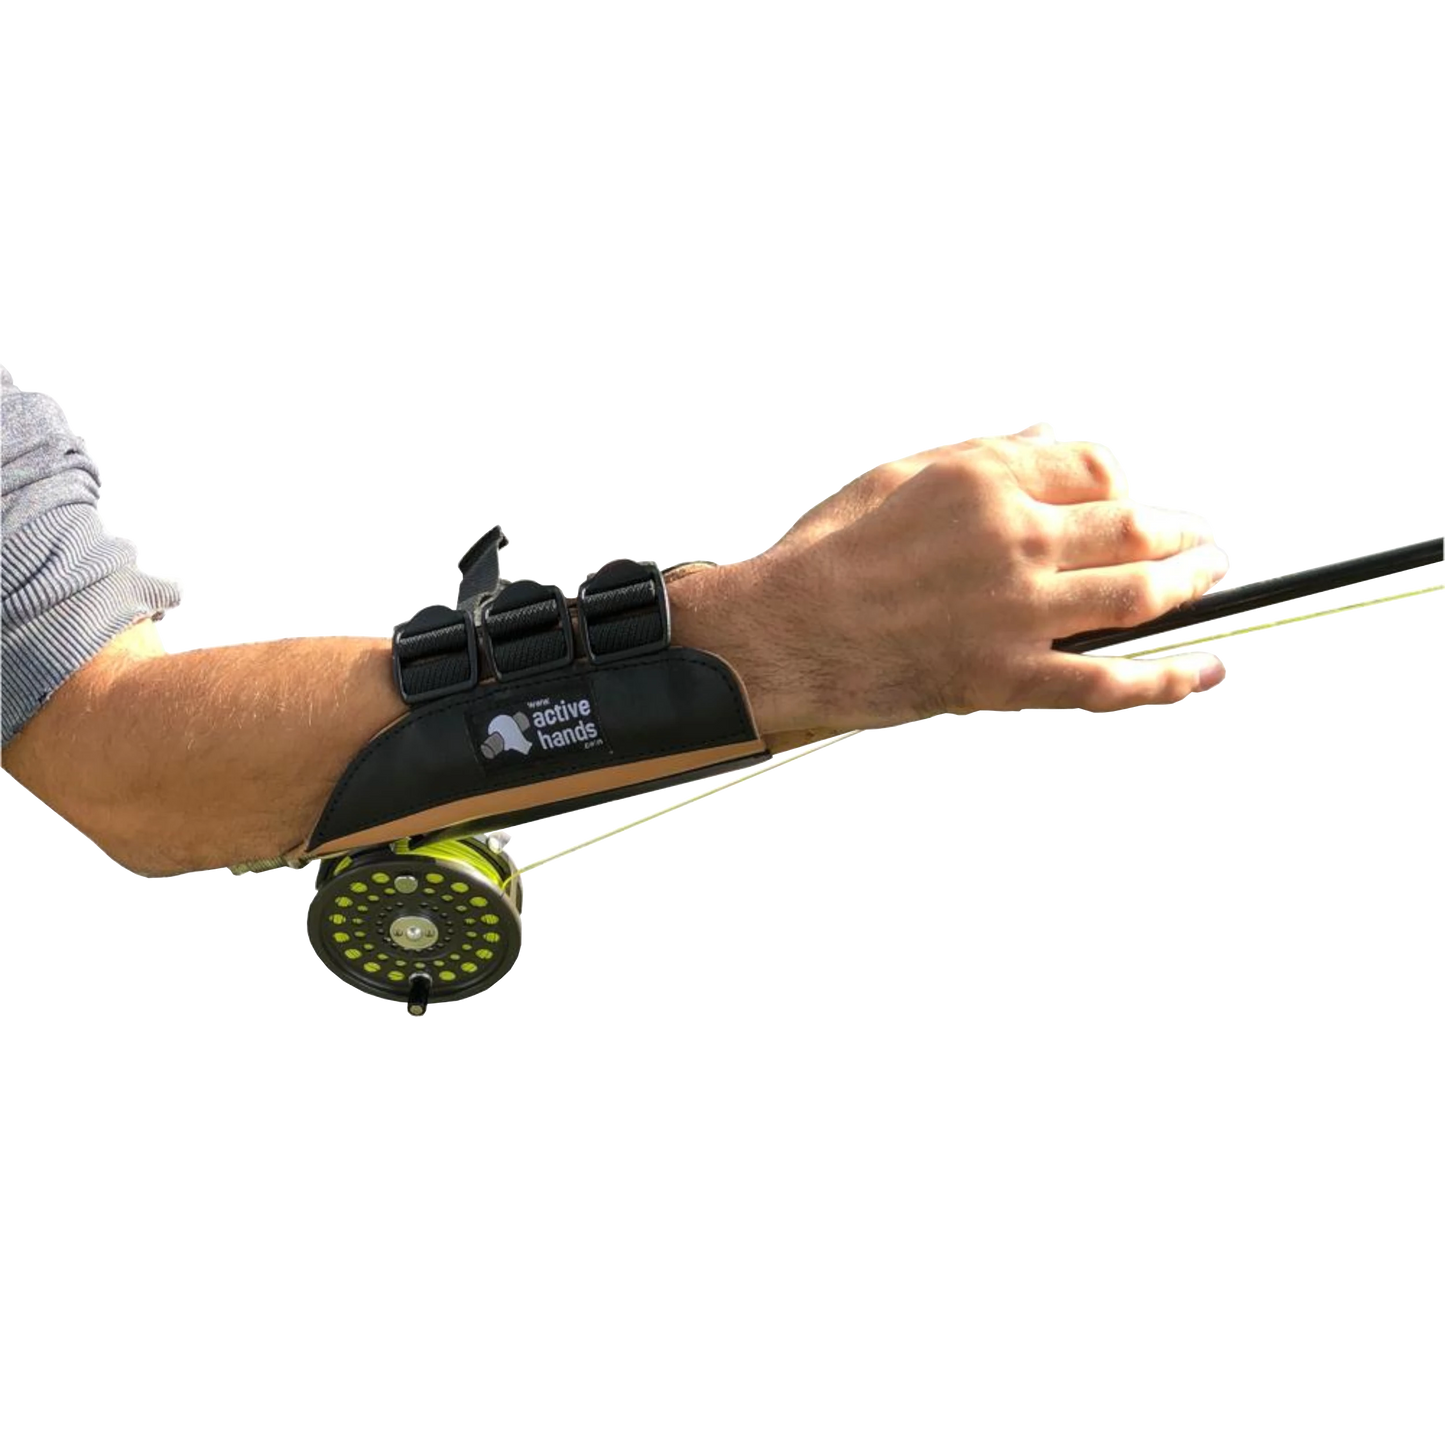 ACTIVE HANDS Strong Arm 2 Fishing Aid (rechter Arm)